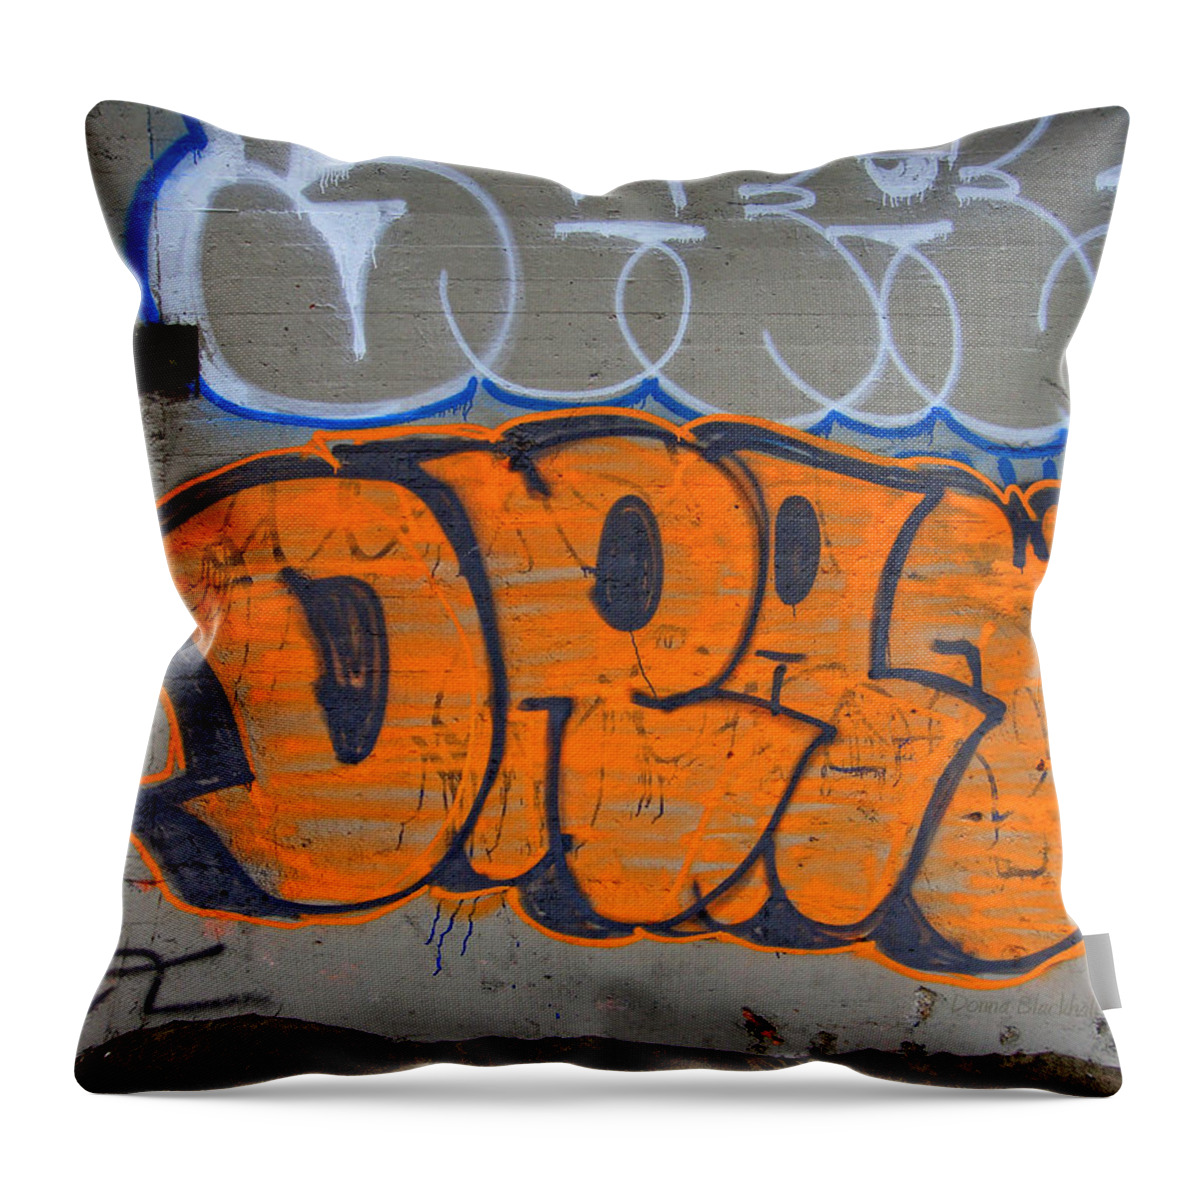 Graffiti Throw Pillow featuring the photograph Drat by Donna Blackhall